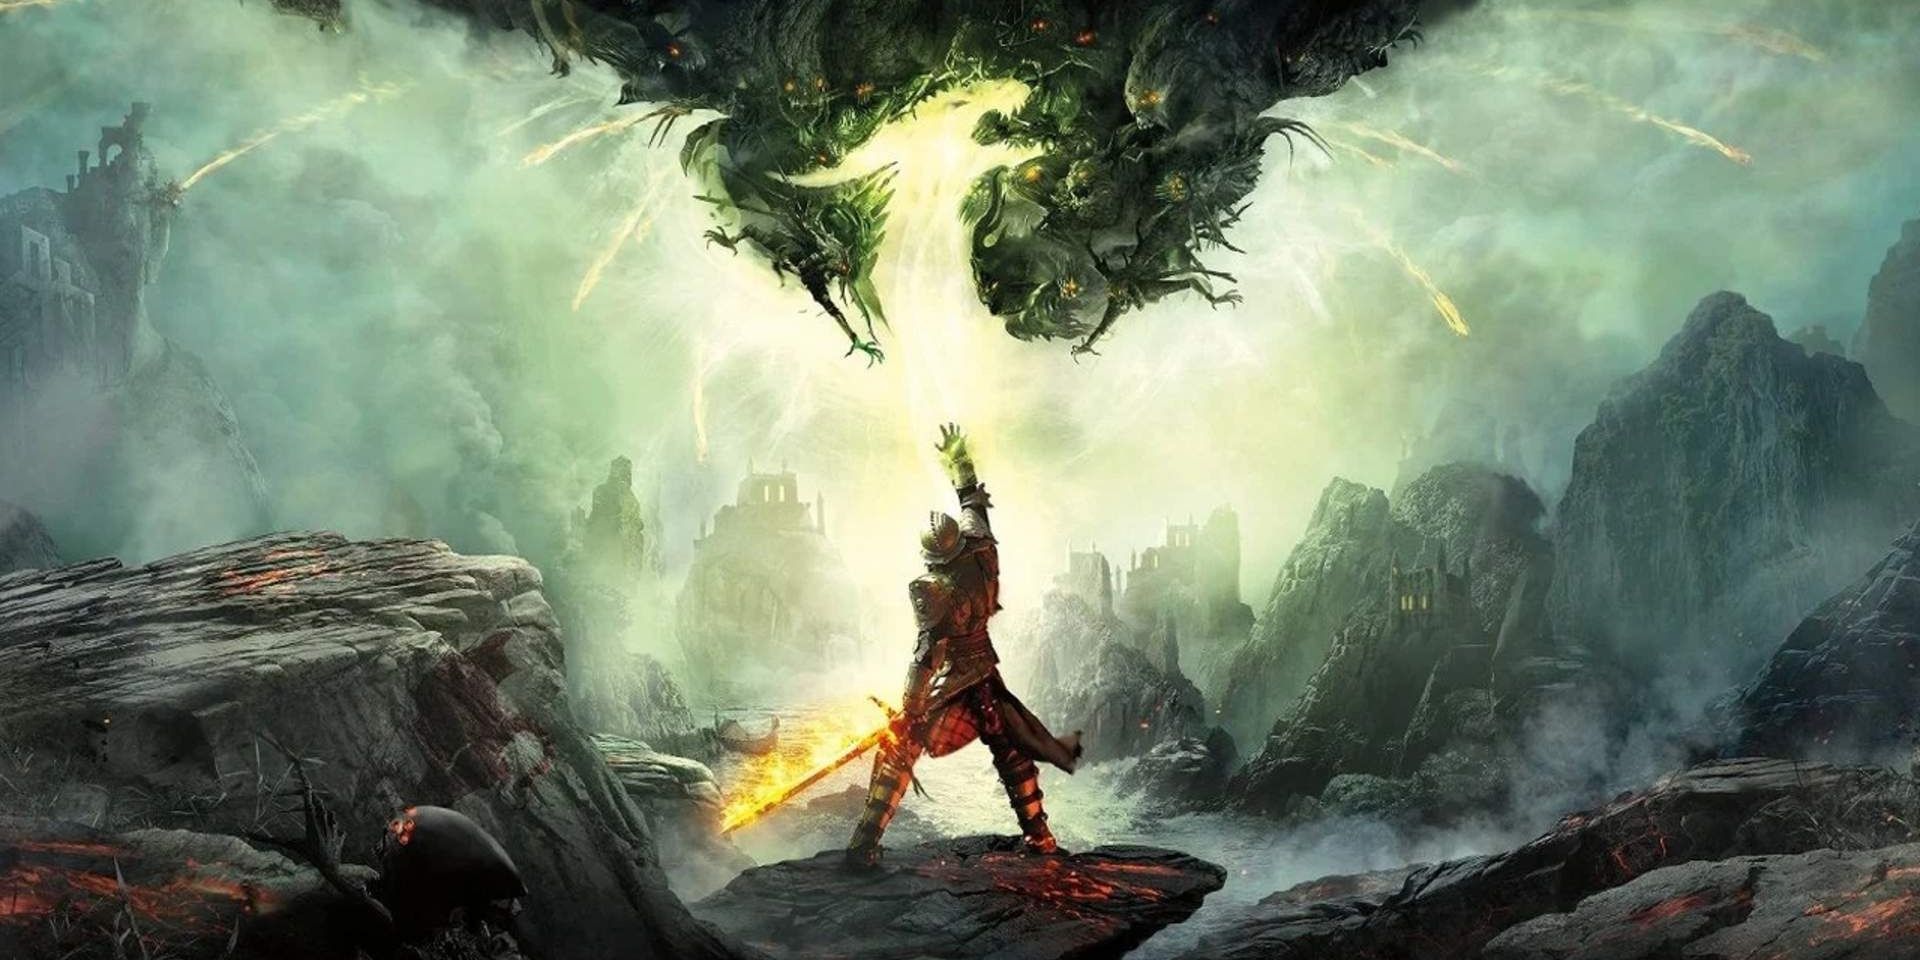 Dragon Age Inquisition: The Protagonist Holds A Sword While Staring Down An Army Of Demons Falling From The Sky